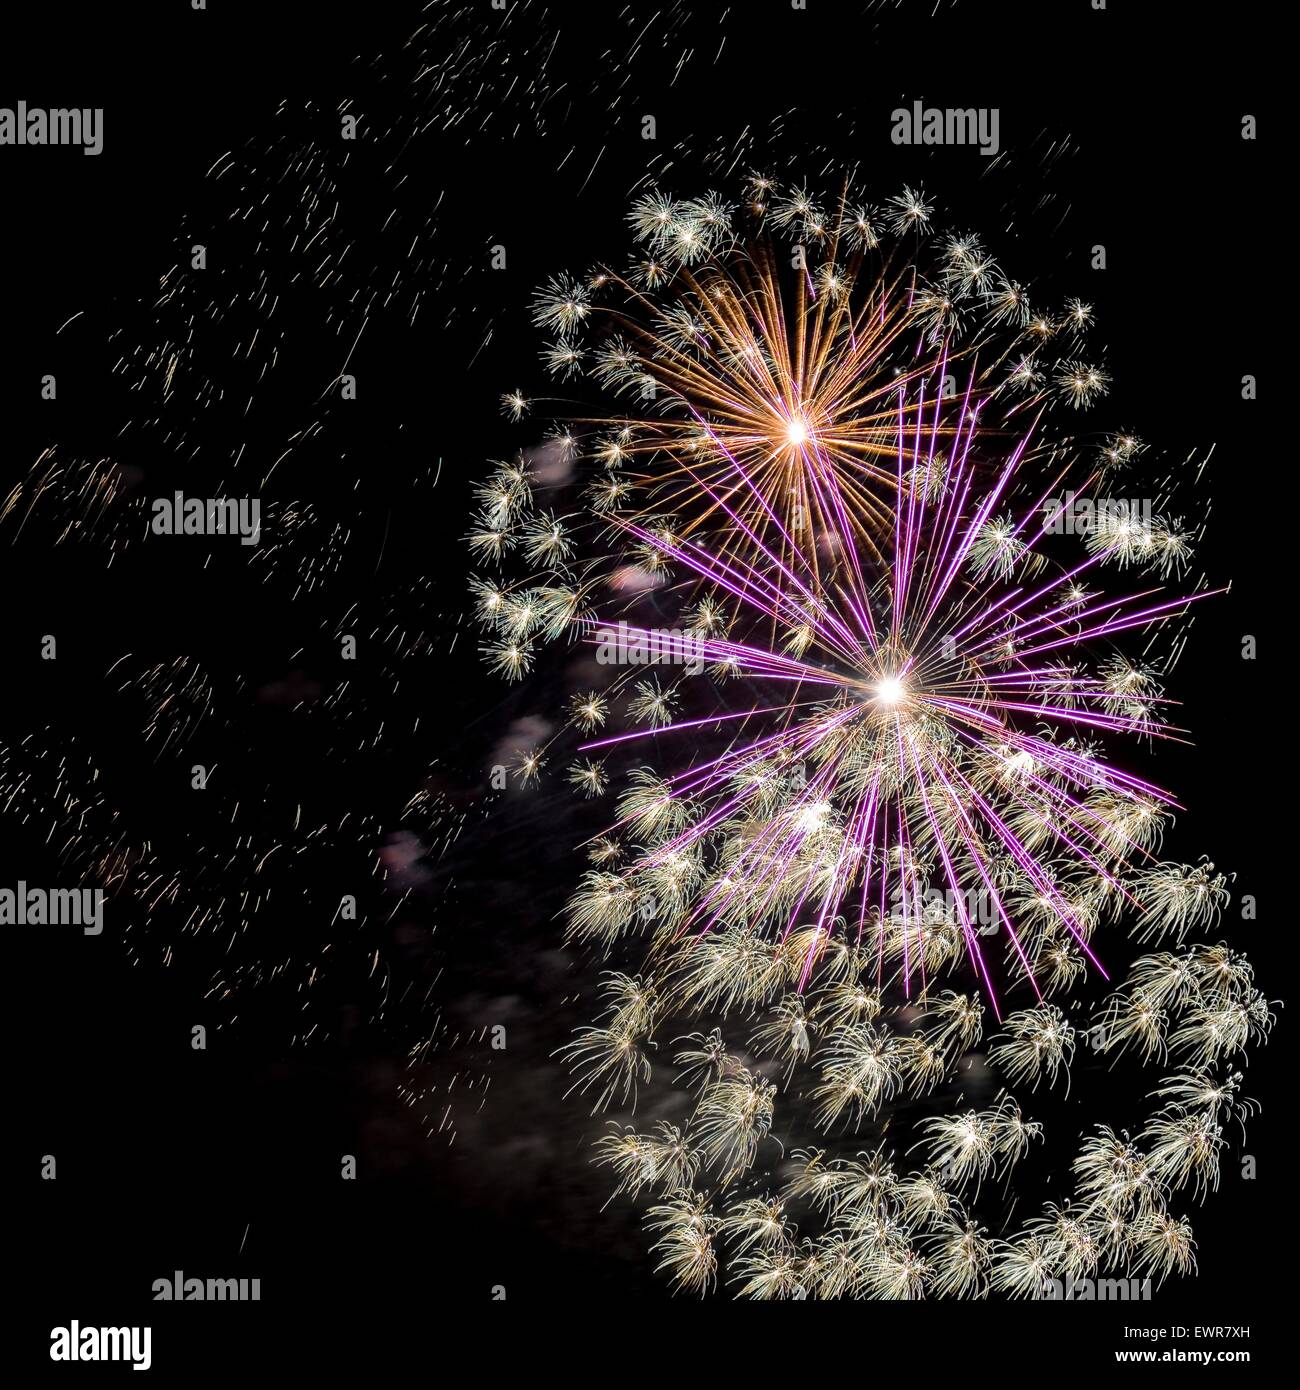 Light drawn picture made due to long time exposure of fireworks explosion against black sky Stock Photo